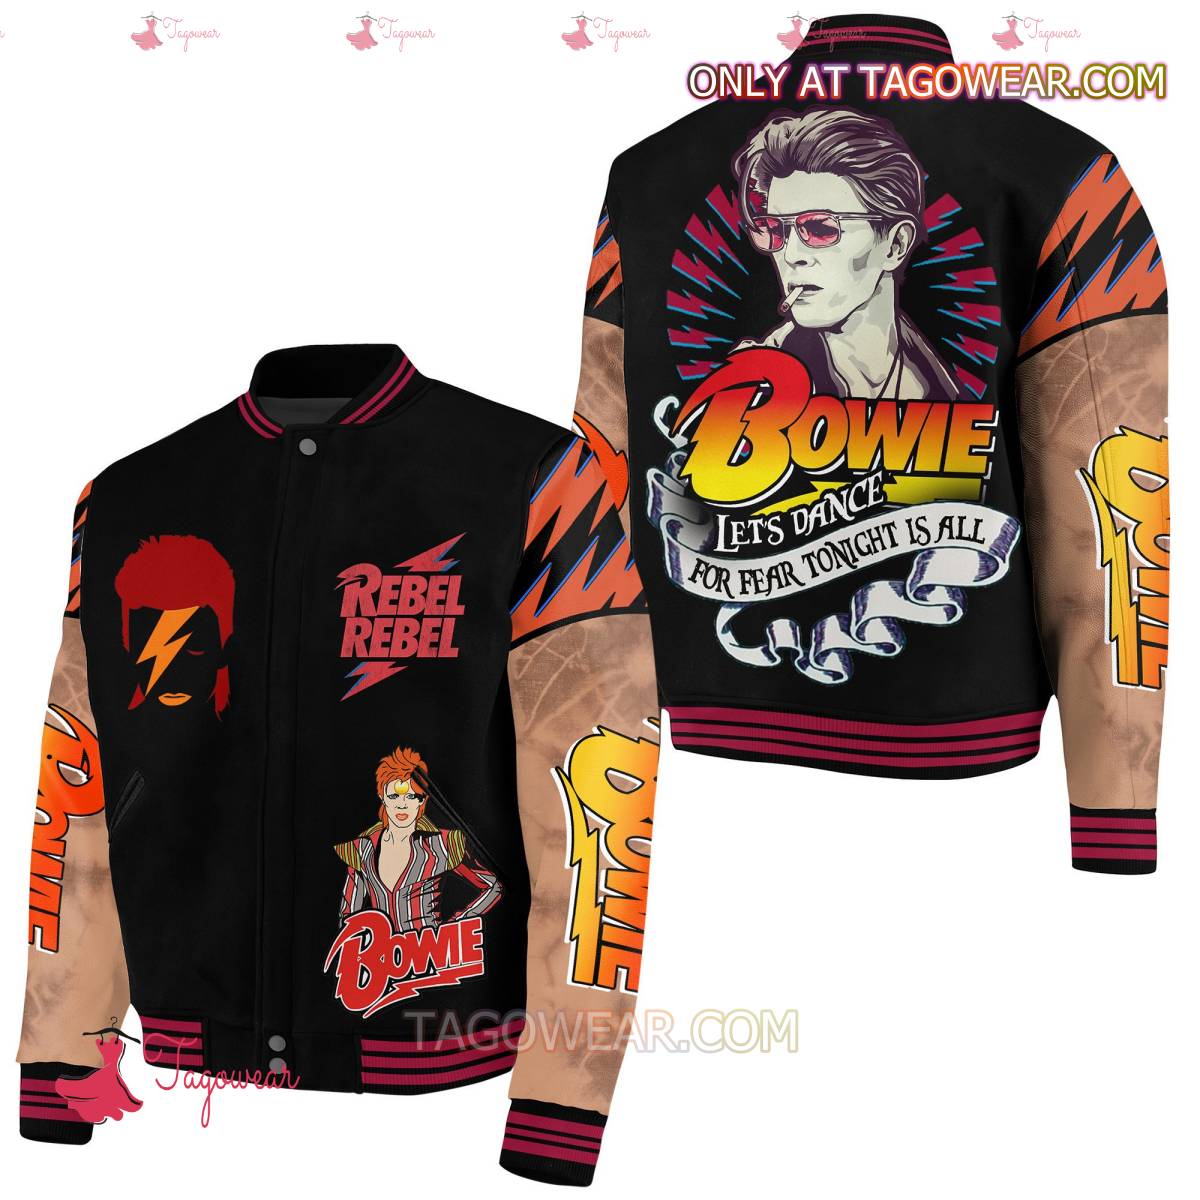 David Bowie Let's Dance For Fear Tonight Is All Baseball Jacket